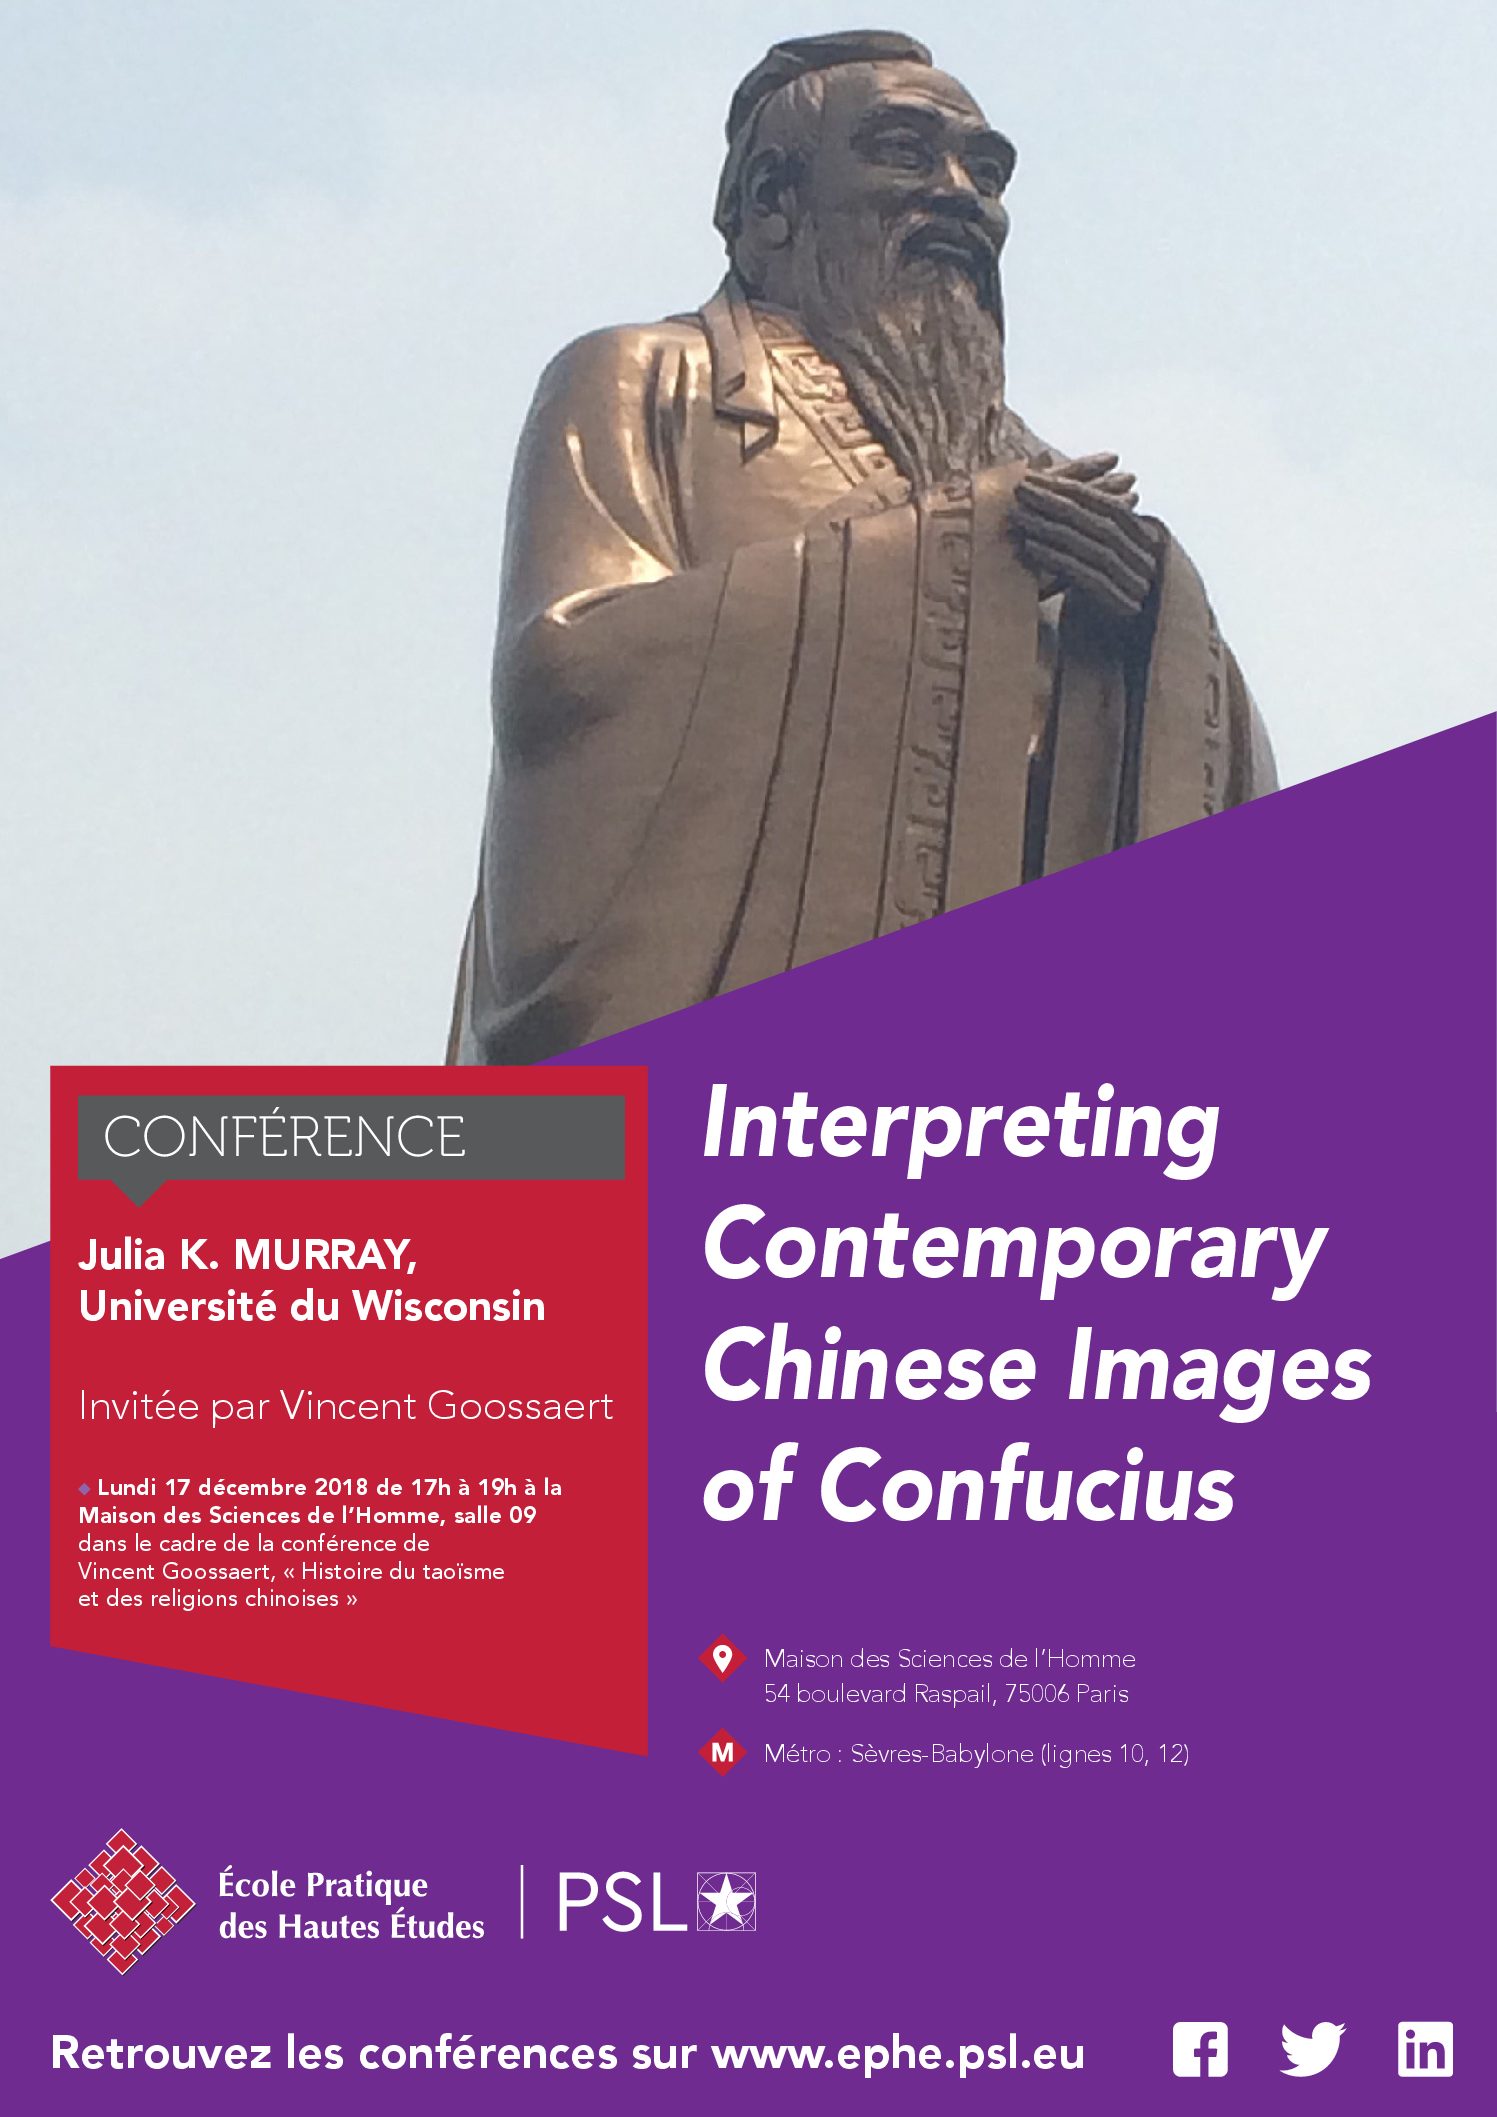 Lundi 17 décembre 2018 – Conférence : “Interpreting Contemporary Chinese Images of Confucius”